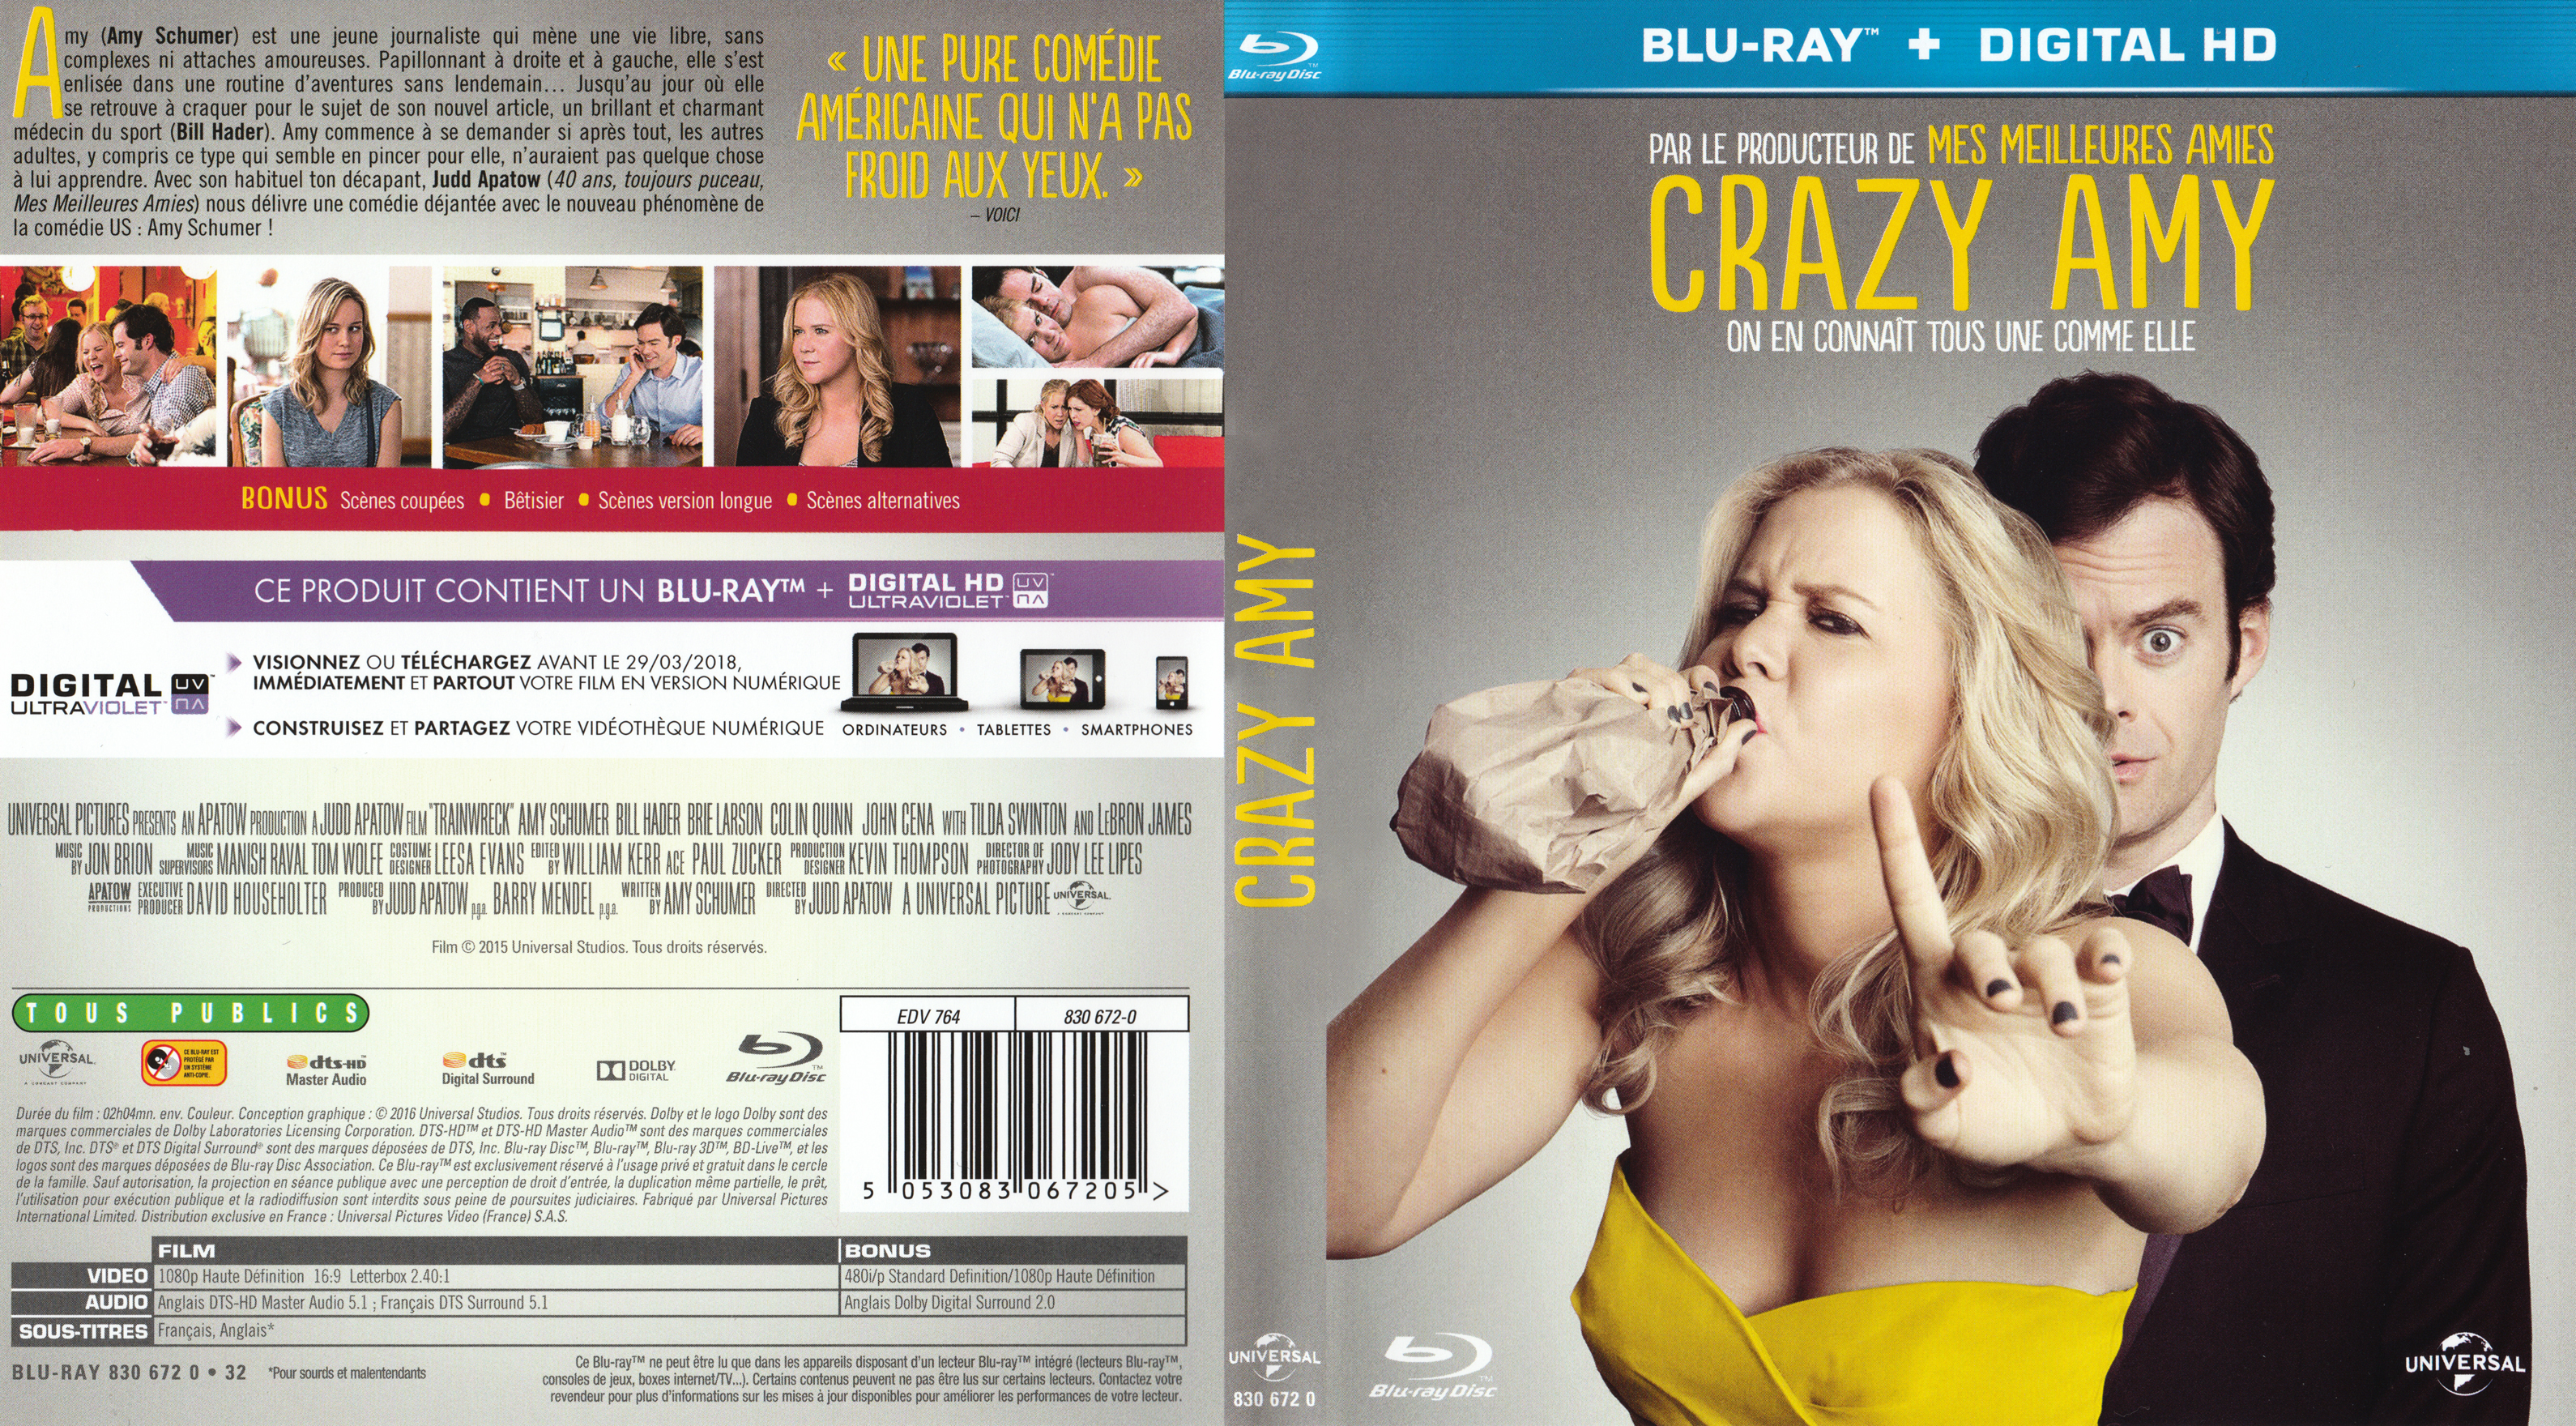 Jaquette DVD Crazy Amy (BLU-RAY)